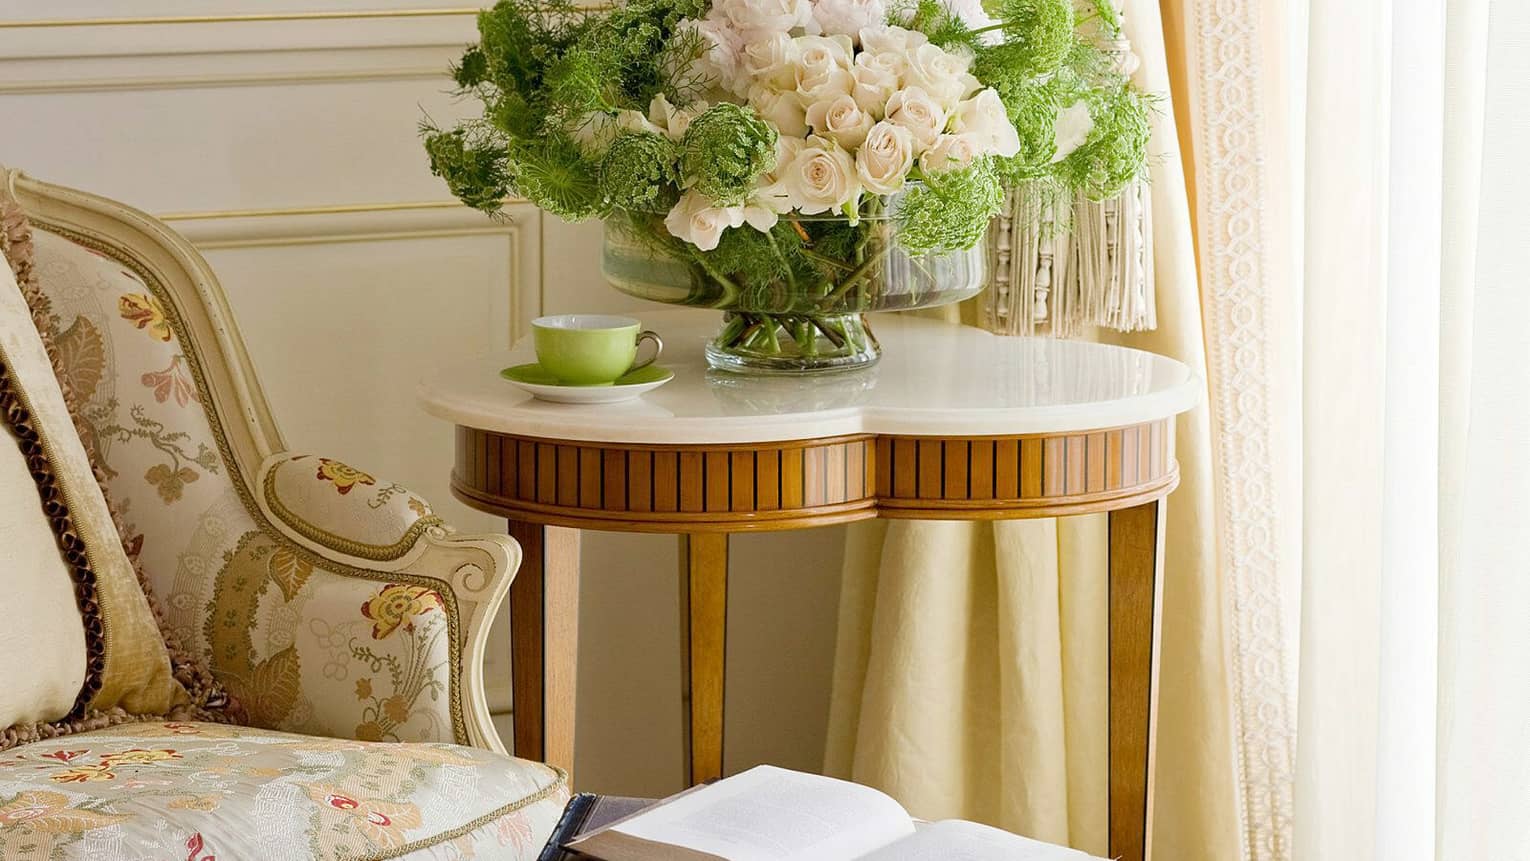 Close-up of elegant antique-style floral armchair with open books on ottoman, heart-shaped wood side table with flowers